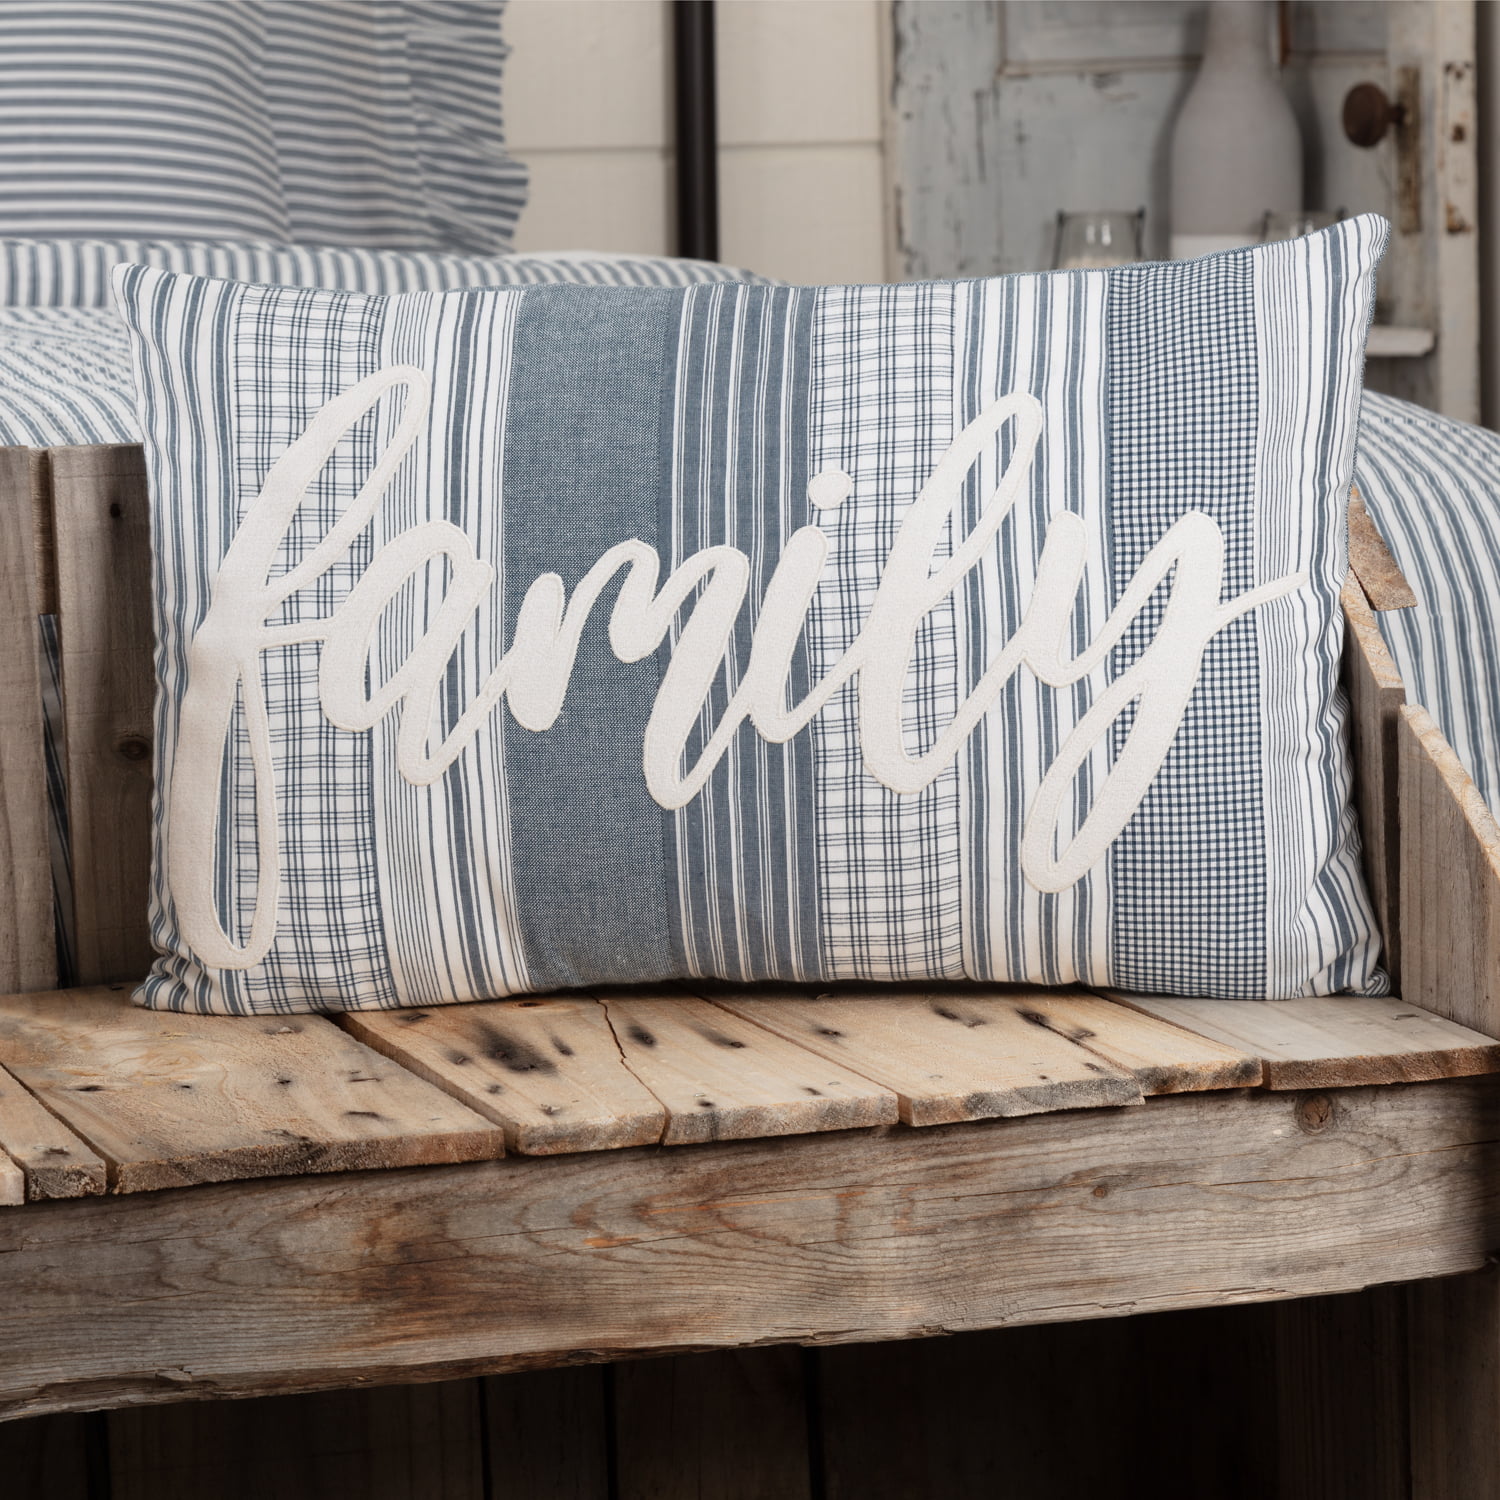 VHC Brands Farmhouse Bedding Miller Farm Charcoal Cotton Stenciled Chambray Text Rectangle Cover Insert Pillow Blue Denim 